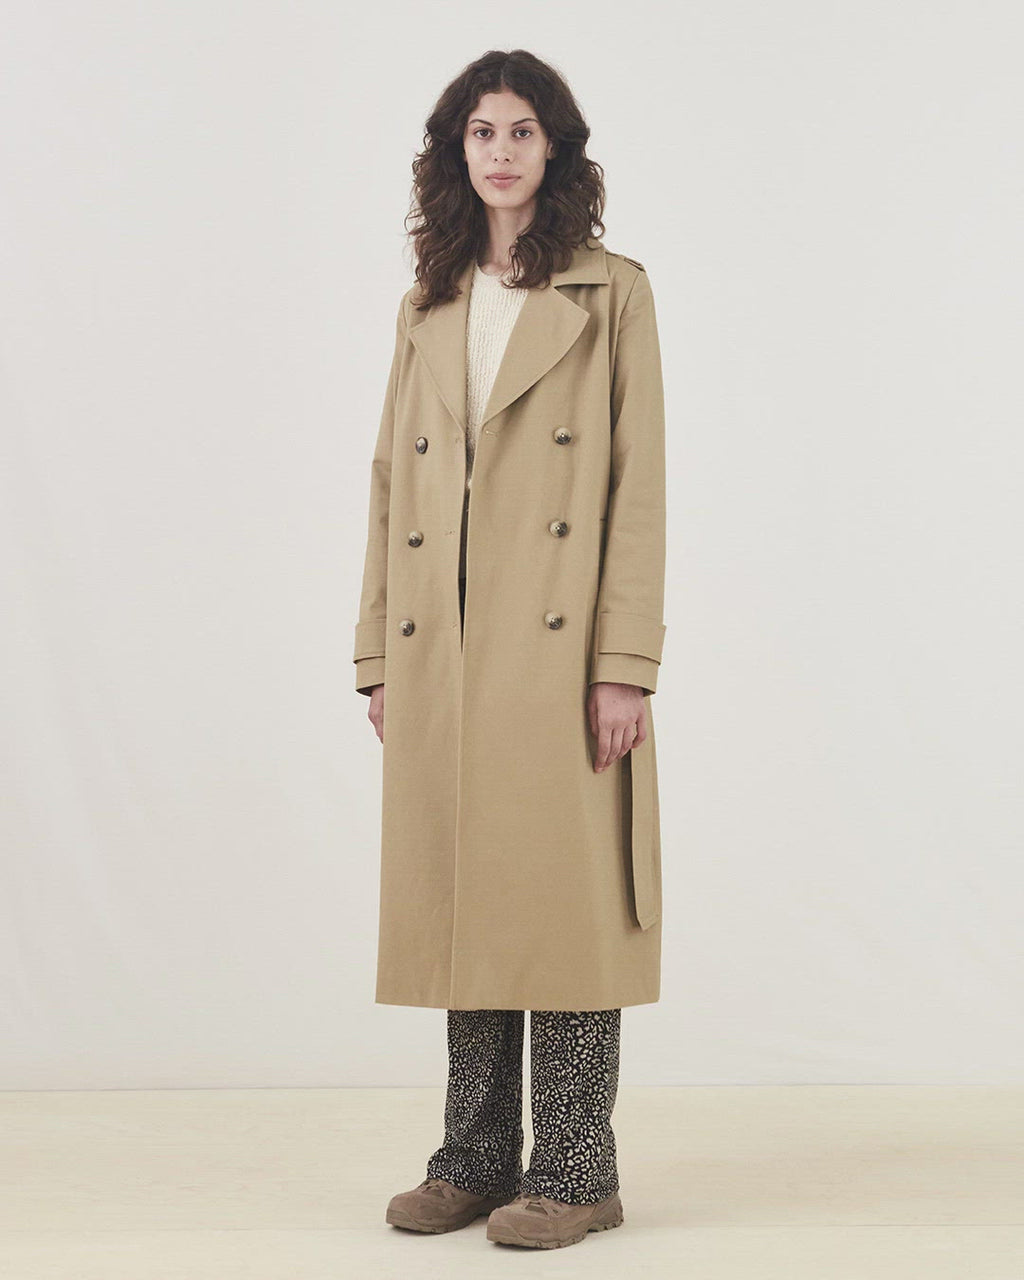 Classic trenchcoat in a rich cotton quality. Oak jacket is double-breasted, with revers, and a slit at the back. The wide belt and cuff adds extra details to the recognizable silhouette. The model is 173 cm and wears a size S/36